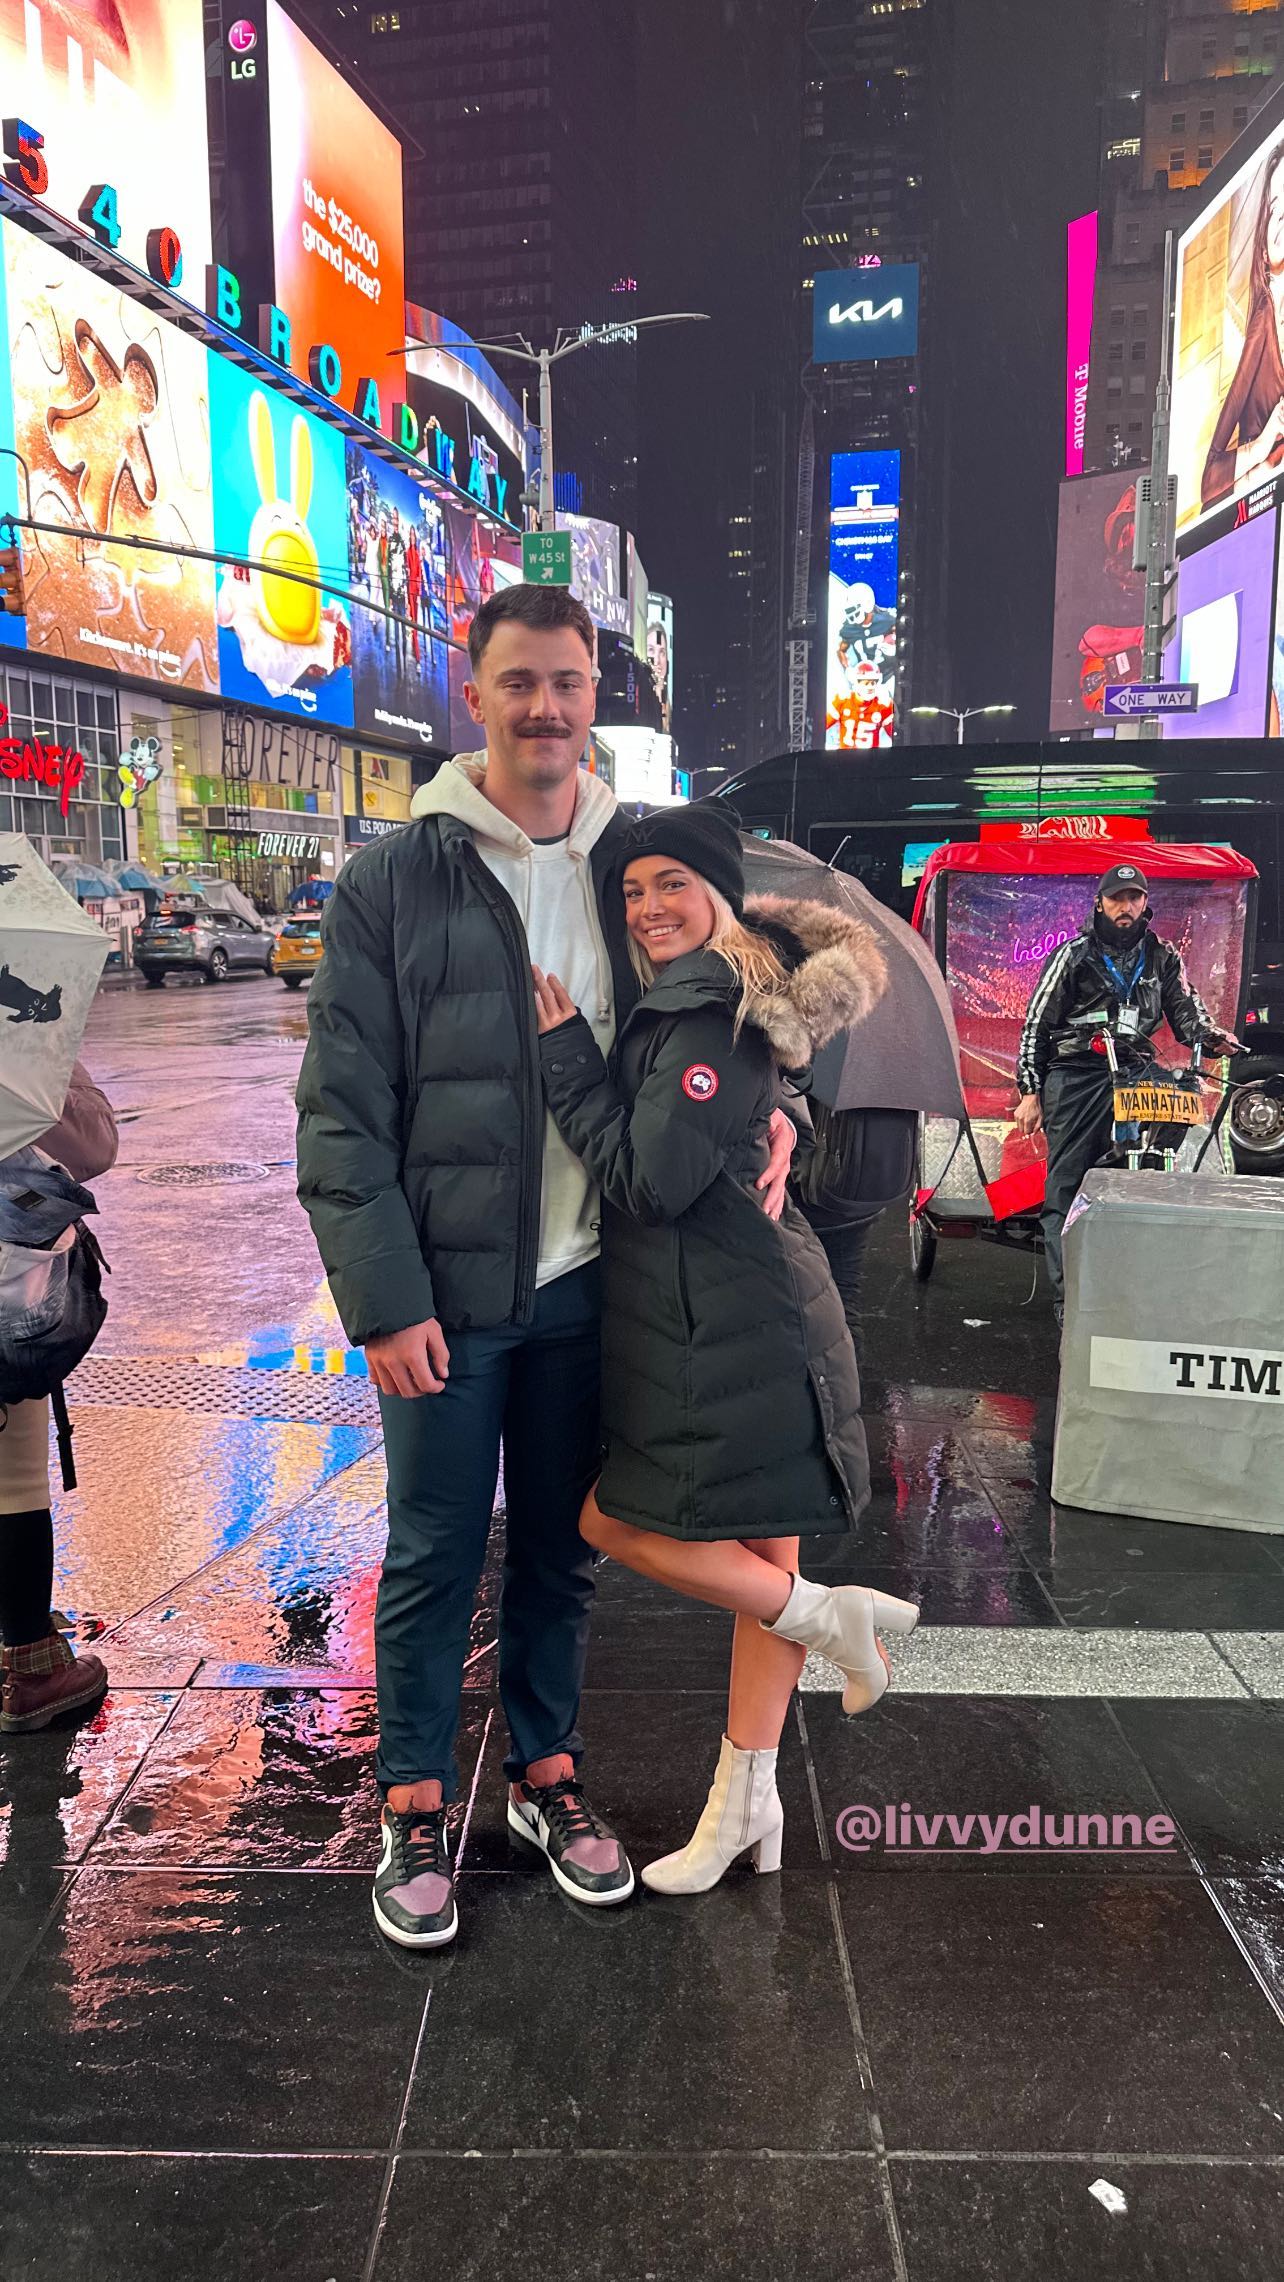 The two then posed for a photo by Times Square